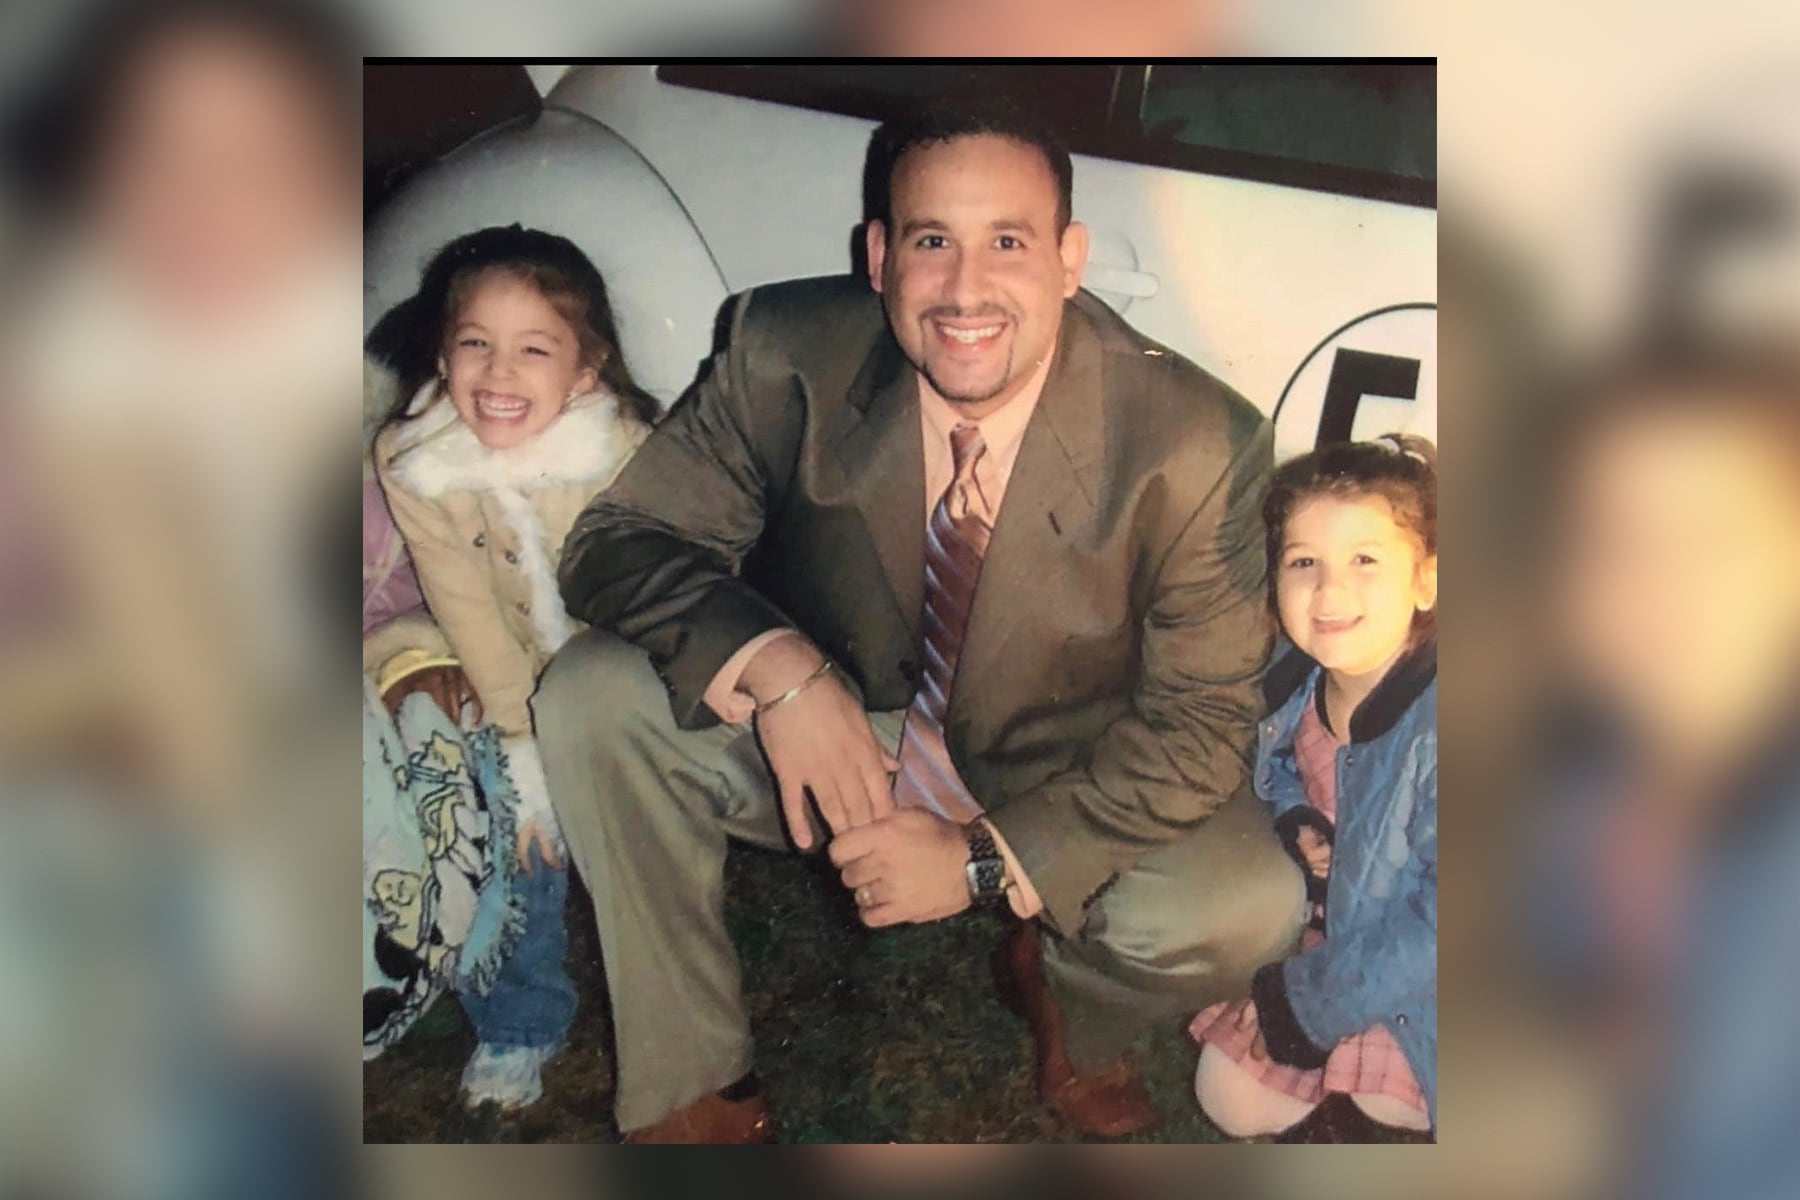 Education Secretary nominee Miguel Cardona pictured in November 2004 with two students during his time as principal of Hanover Elementary in Meriden, Connecticut.